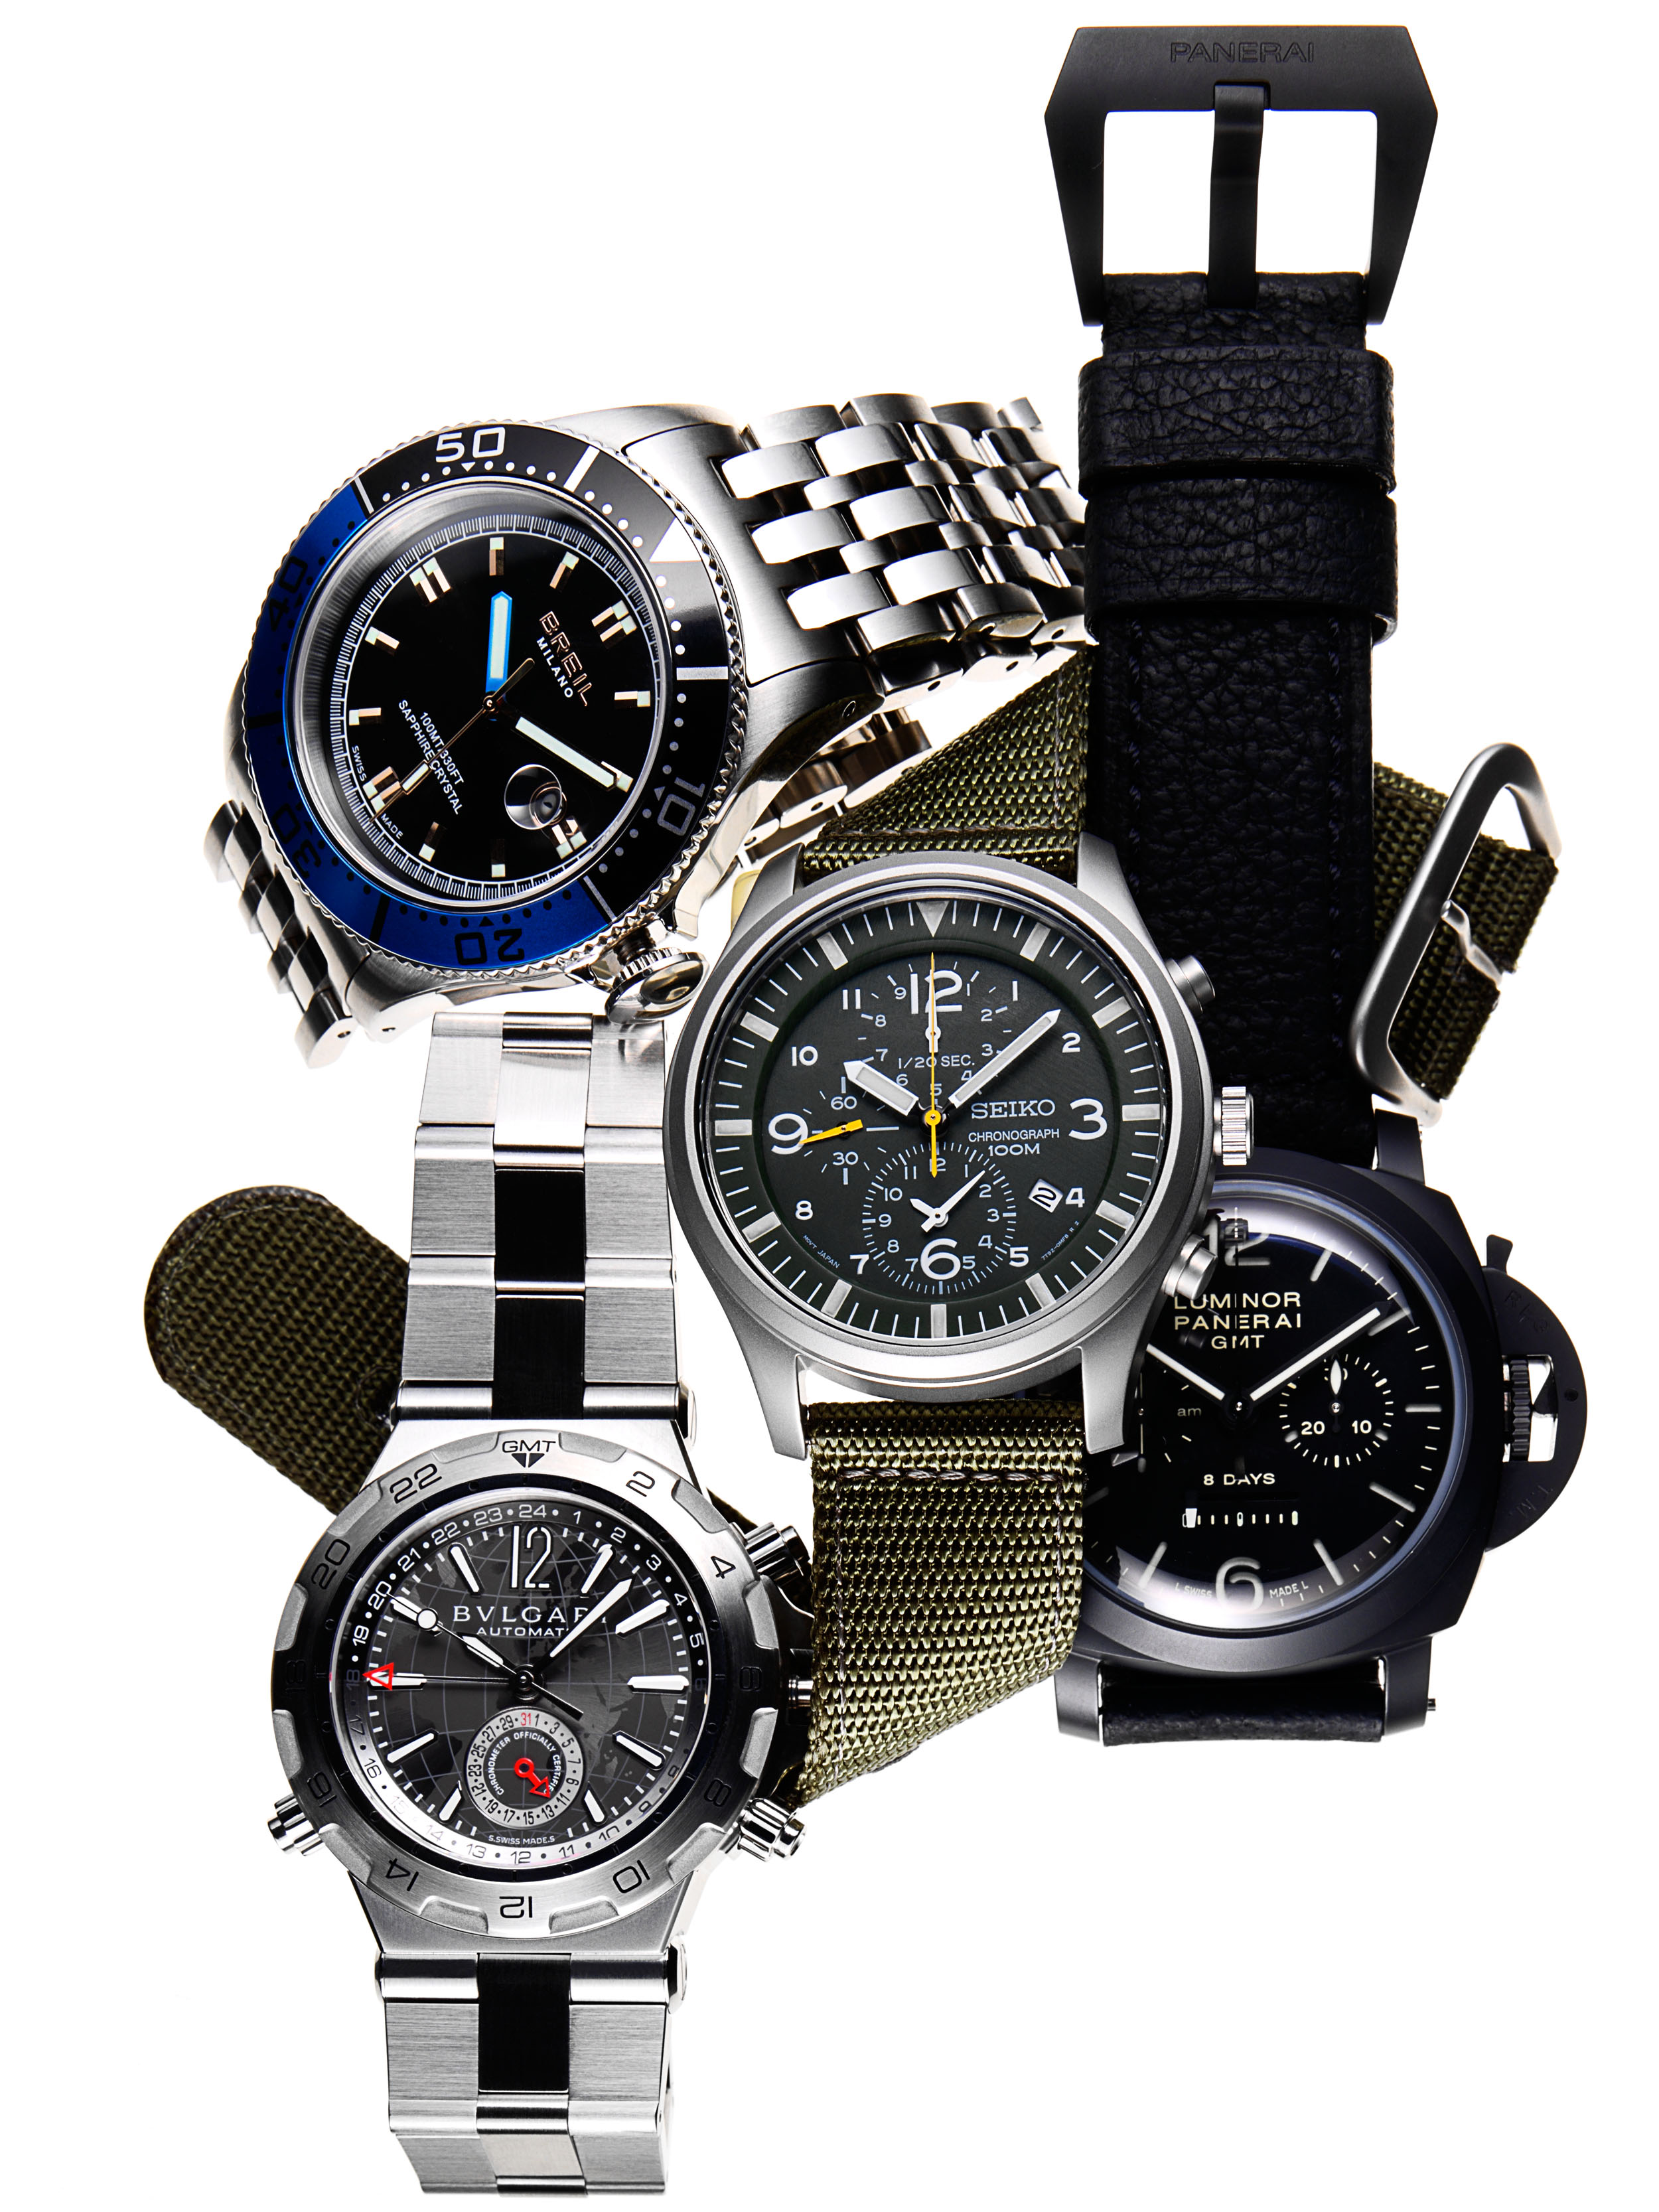 watches_051_RS.jpg